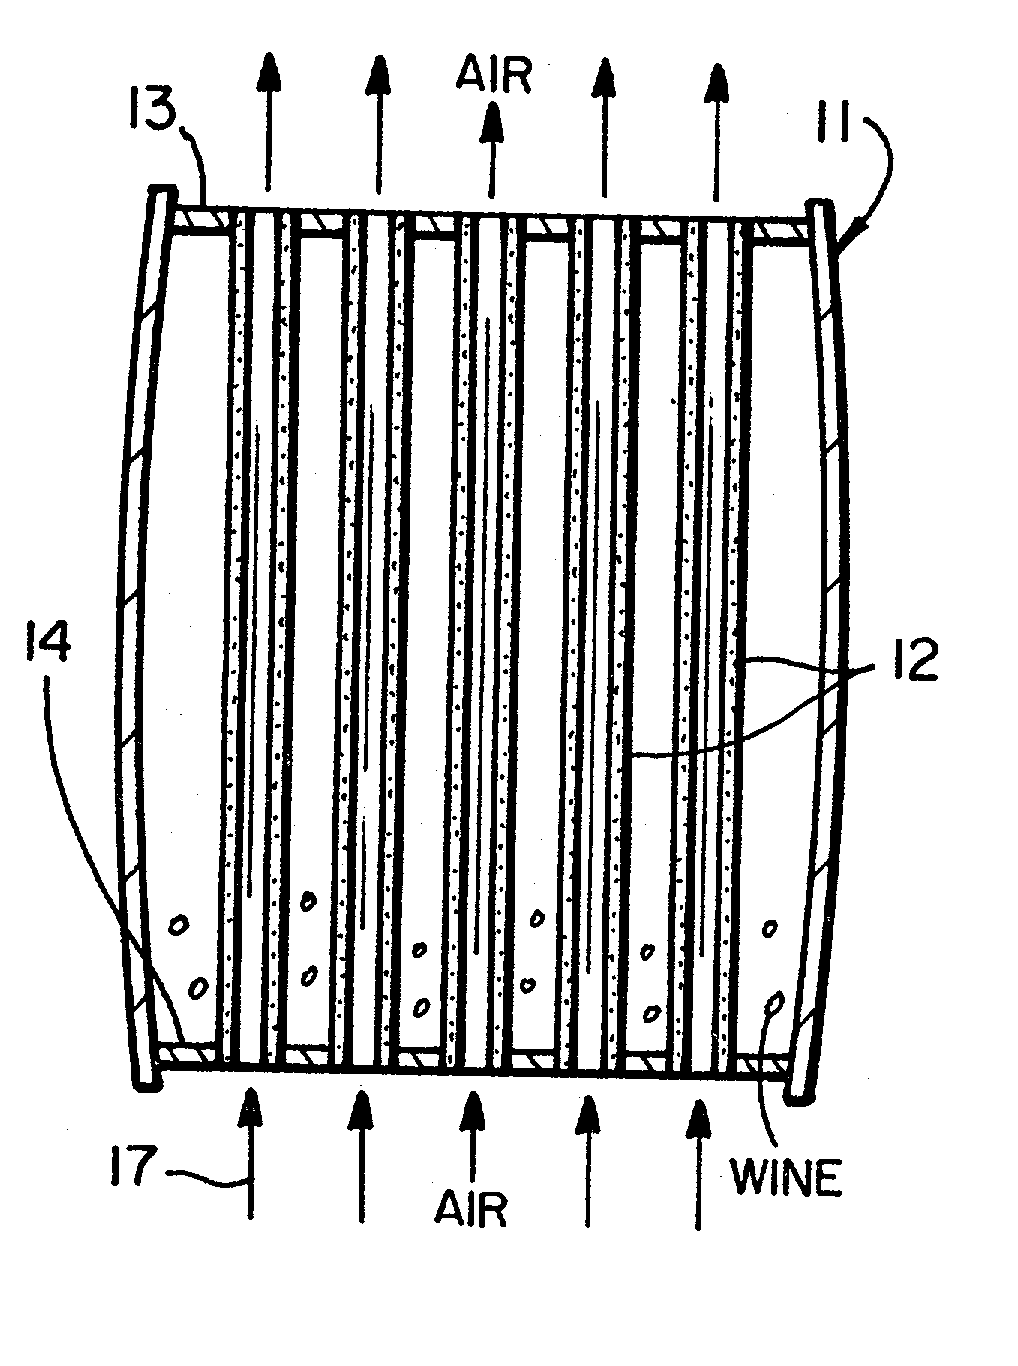 Apparatus and method for aging wine or spirits